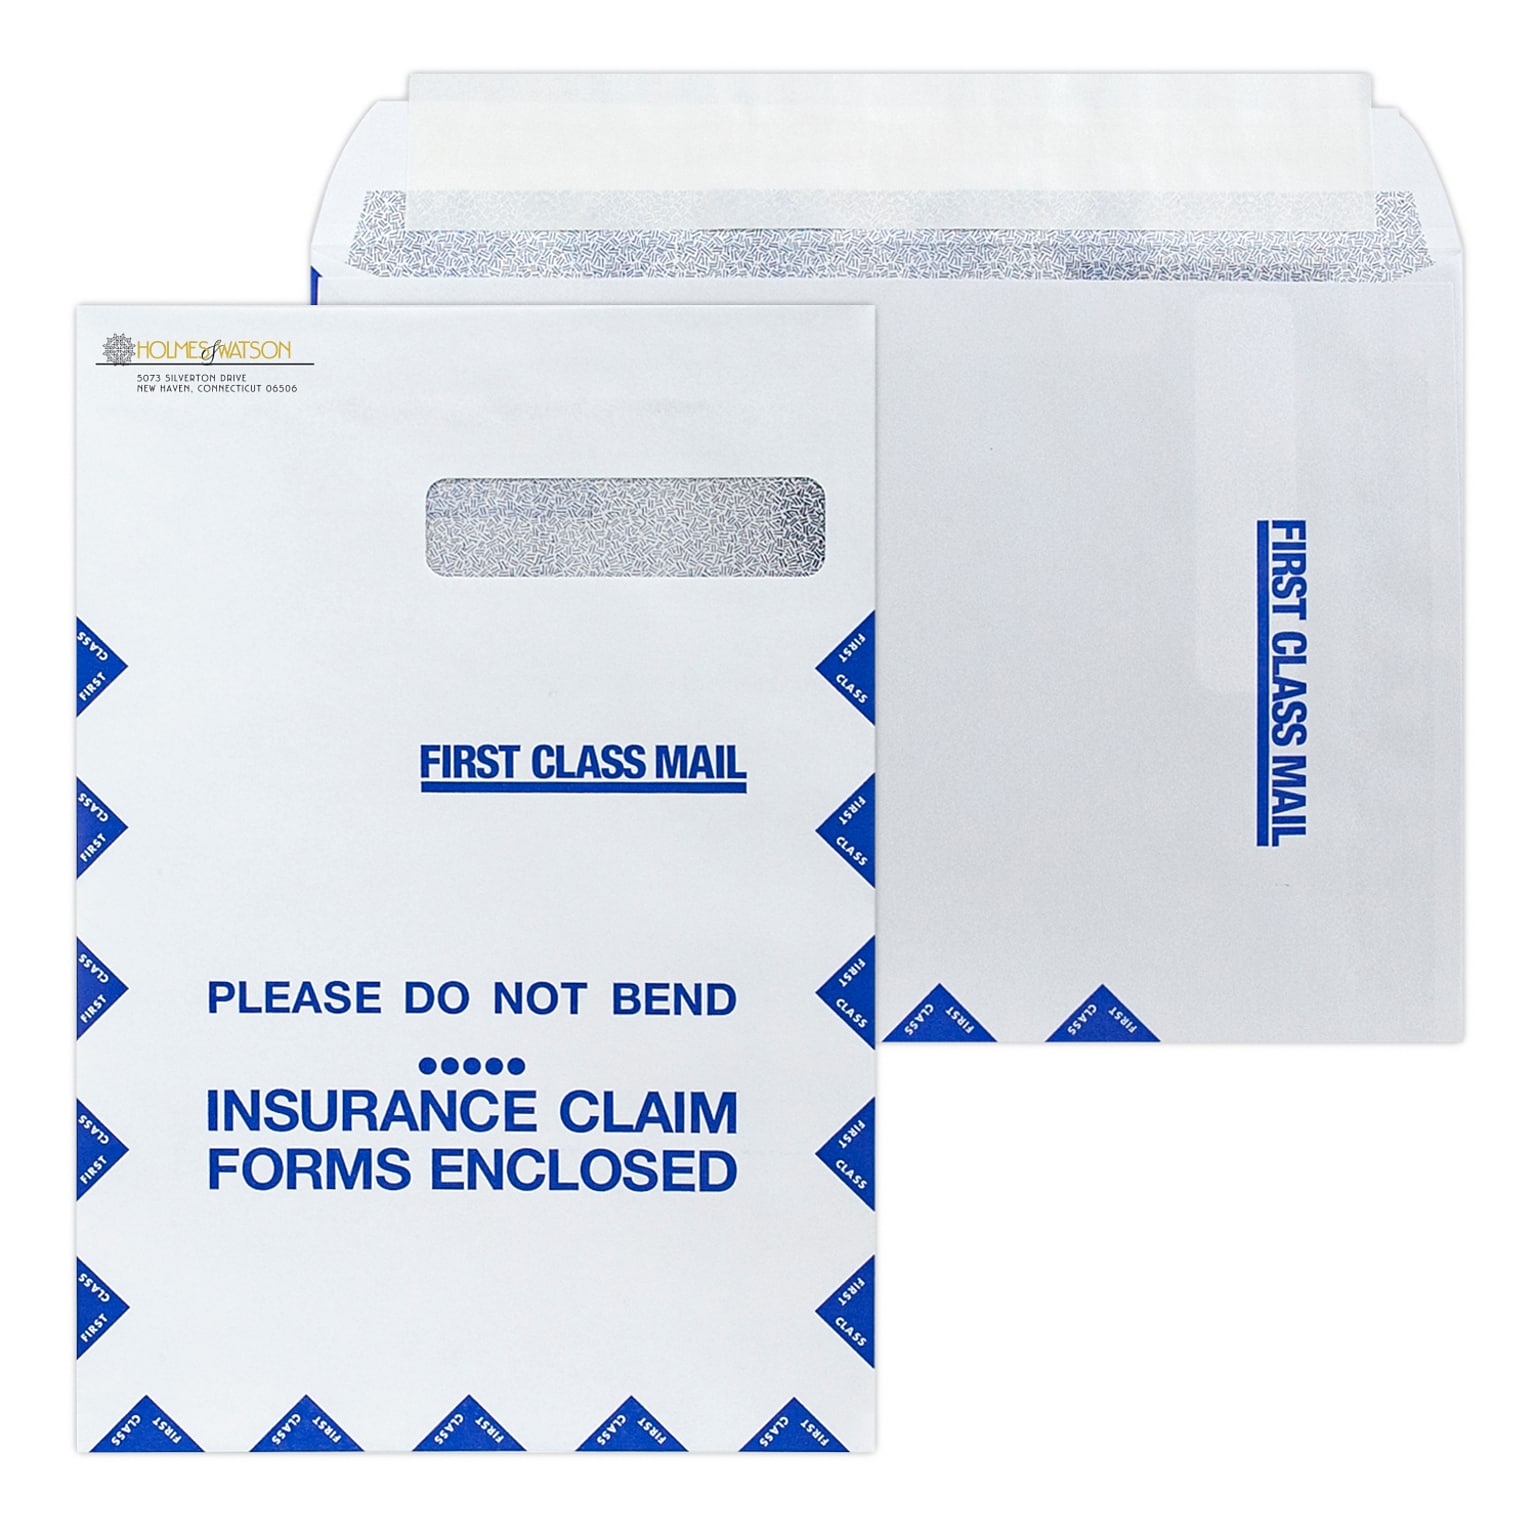 Custom 9x13 Resubmission Right Window Self Seal Envelopes with Security Tint, 24# White Wove, 1 Std and 1 Custom Ink, 250/Pack